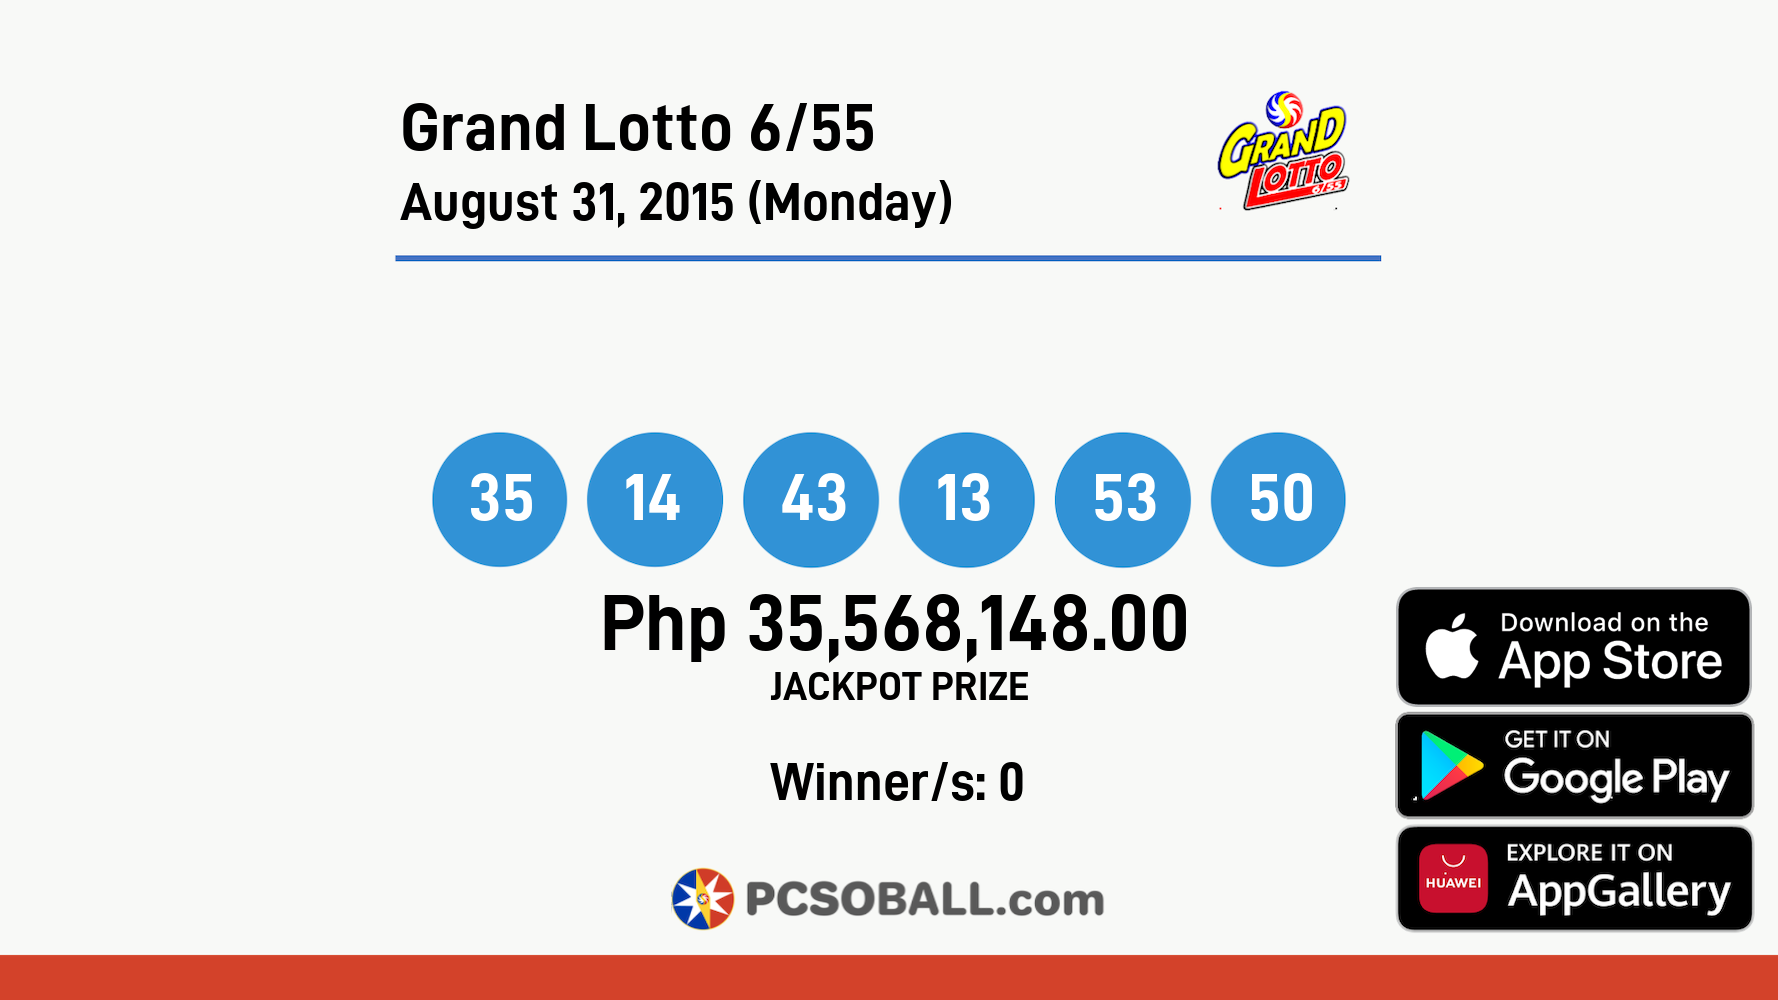 Grand Lotto 6/55 August 31, 2015 (Monday) Result